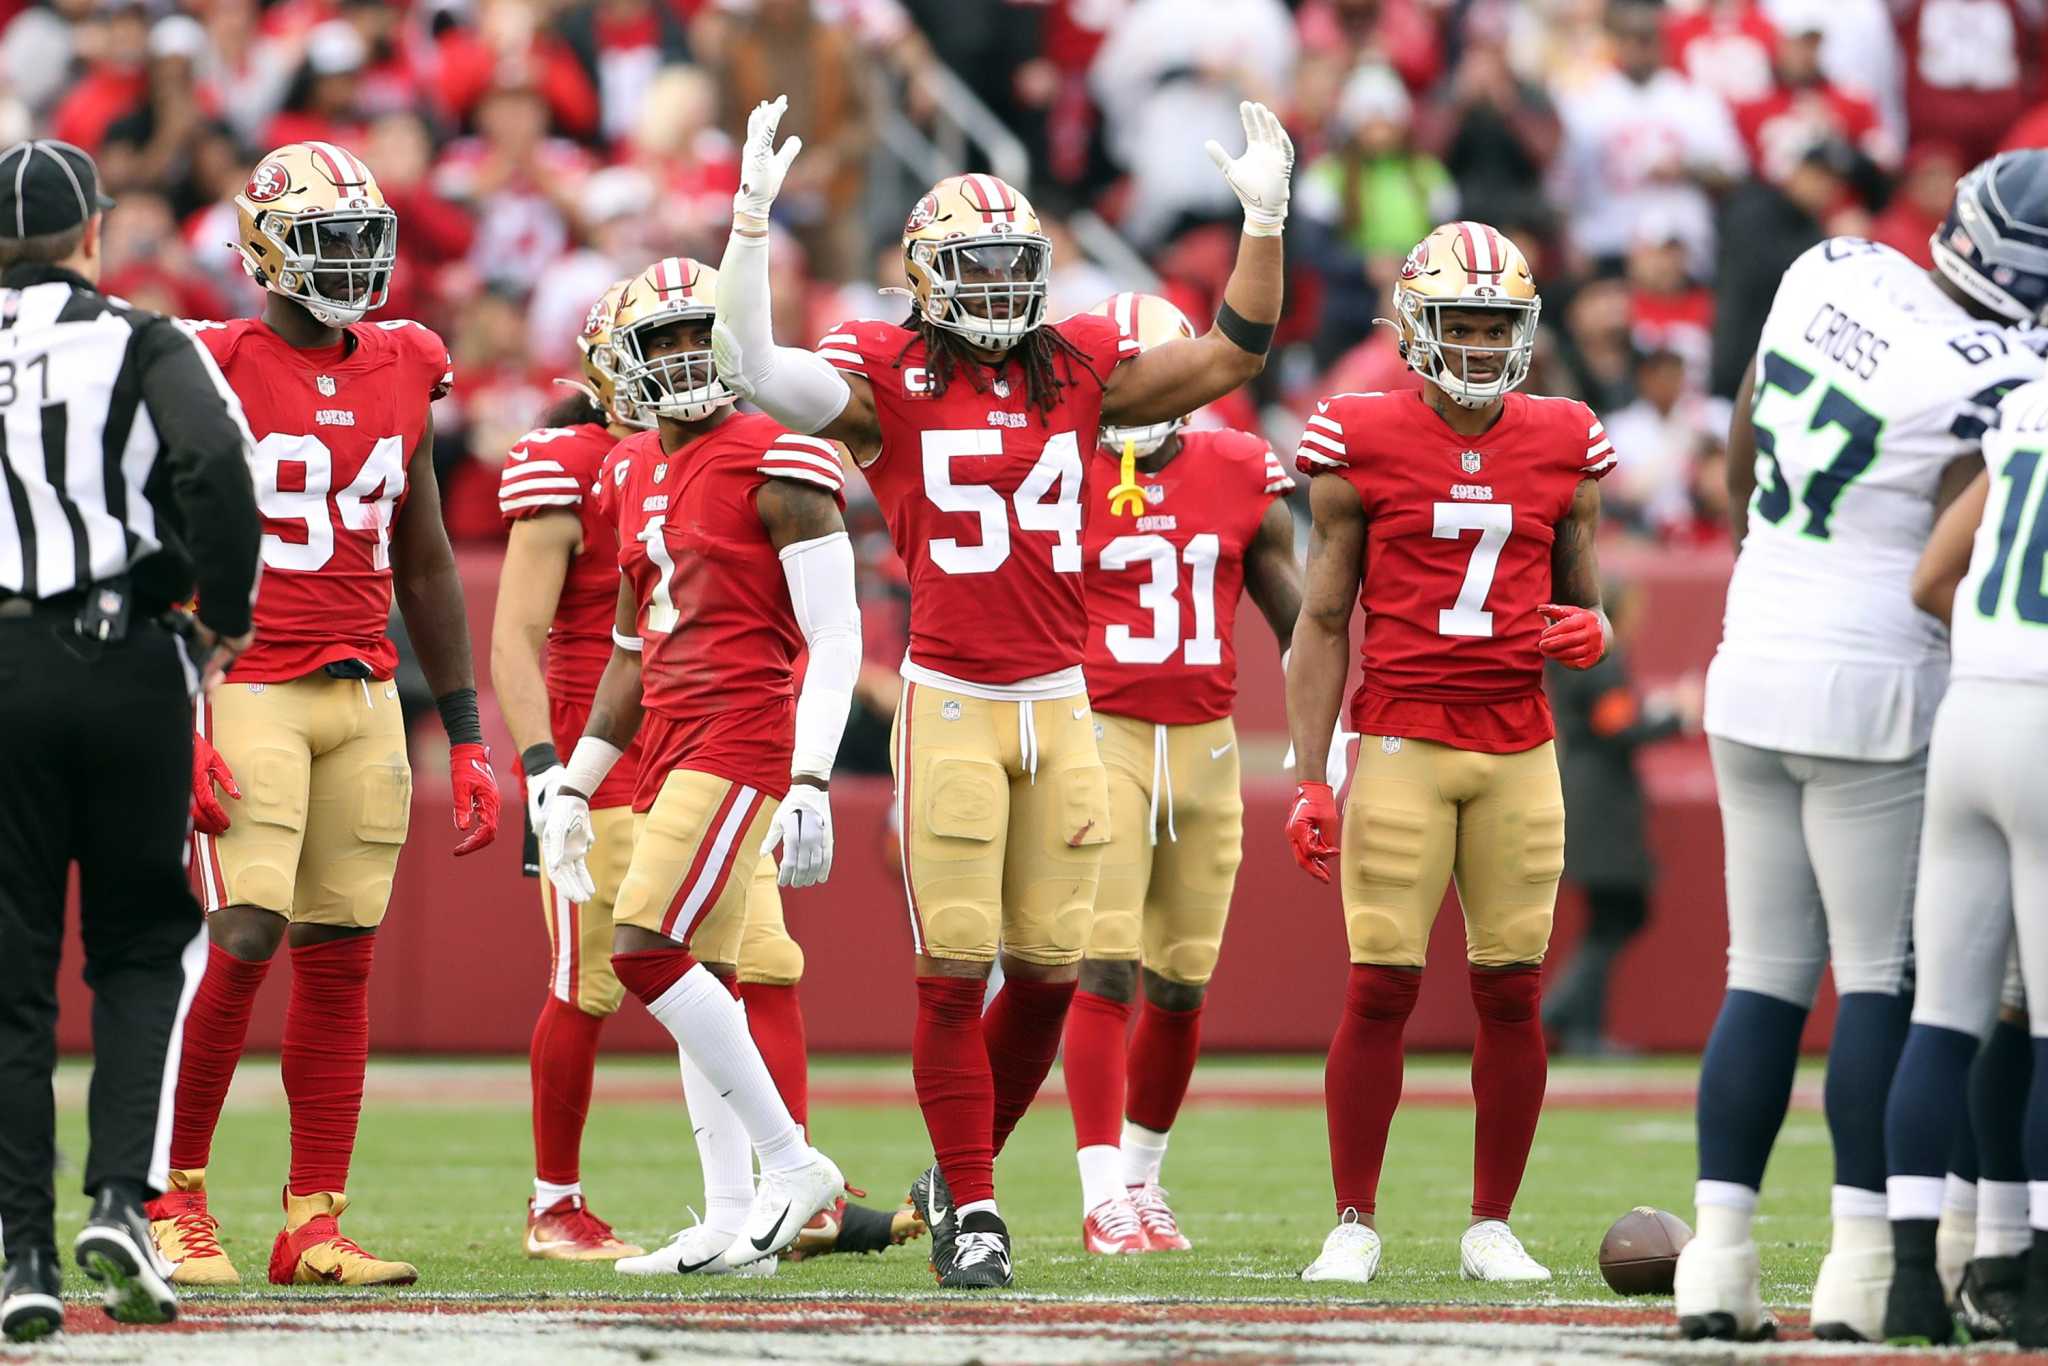 who the 49ers play this weekend